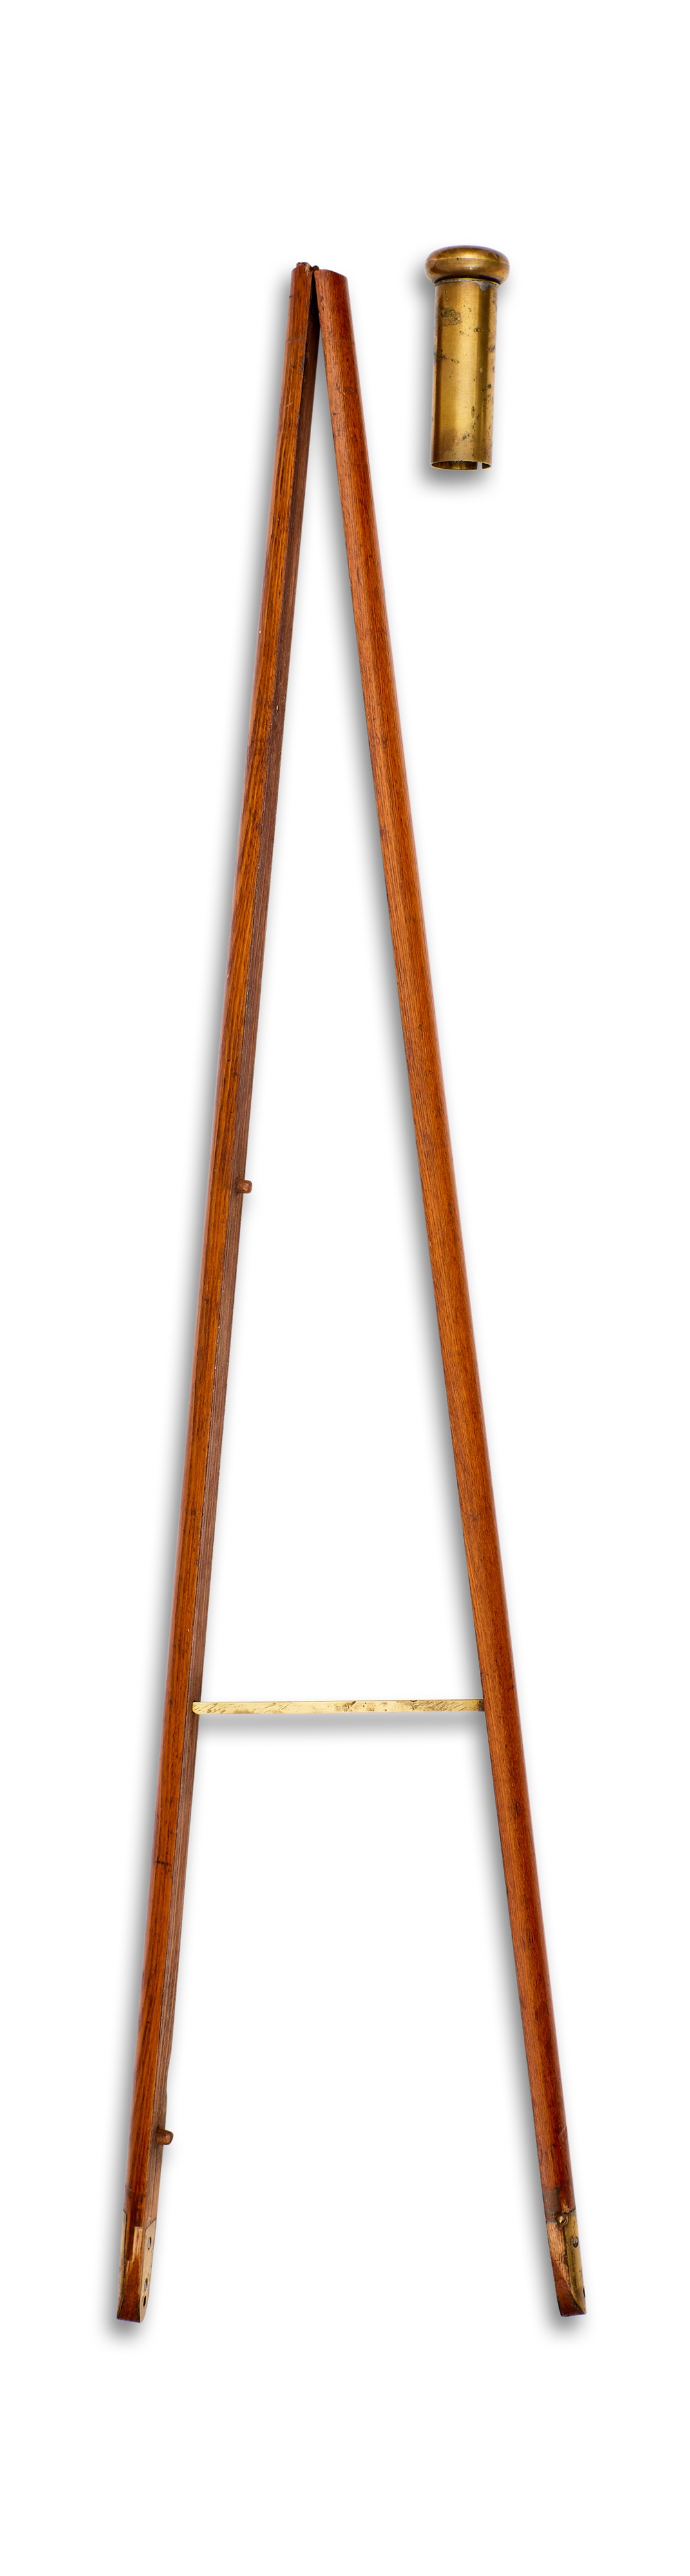 AN EARLY 20TH CENTURY MILITARY DRESS PARADE STEP CANE